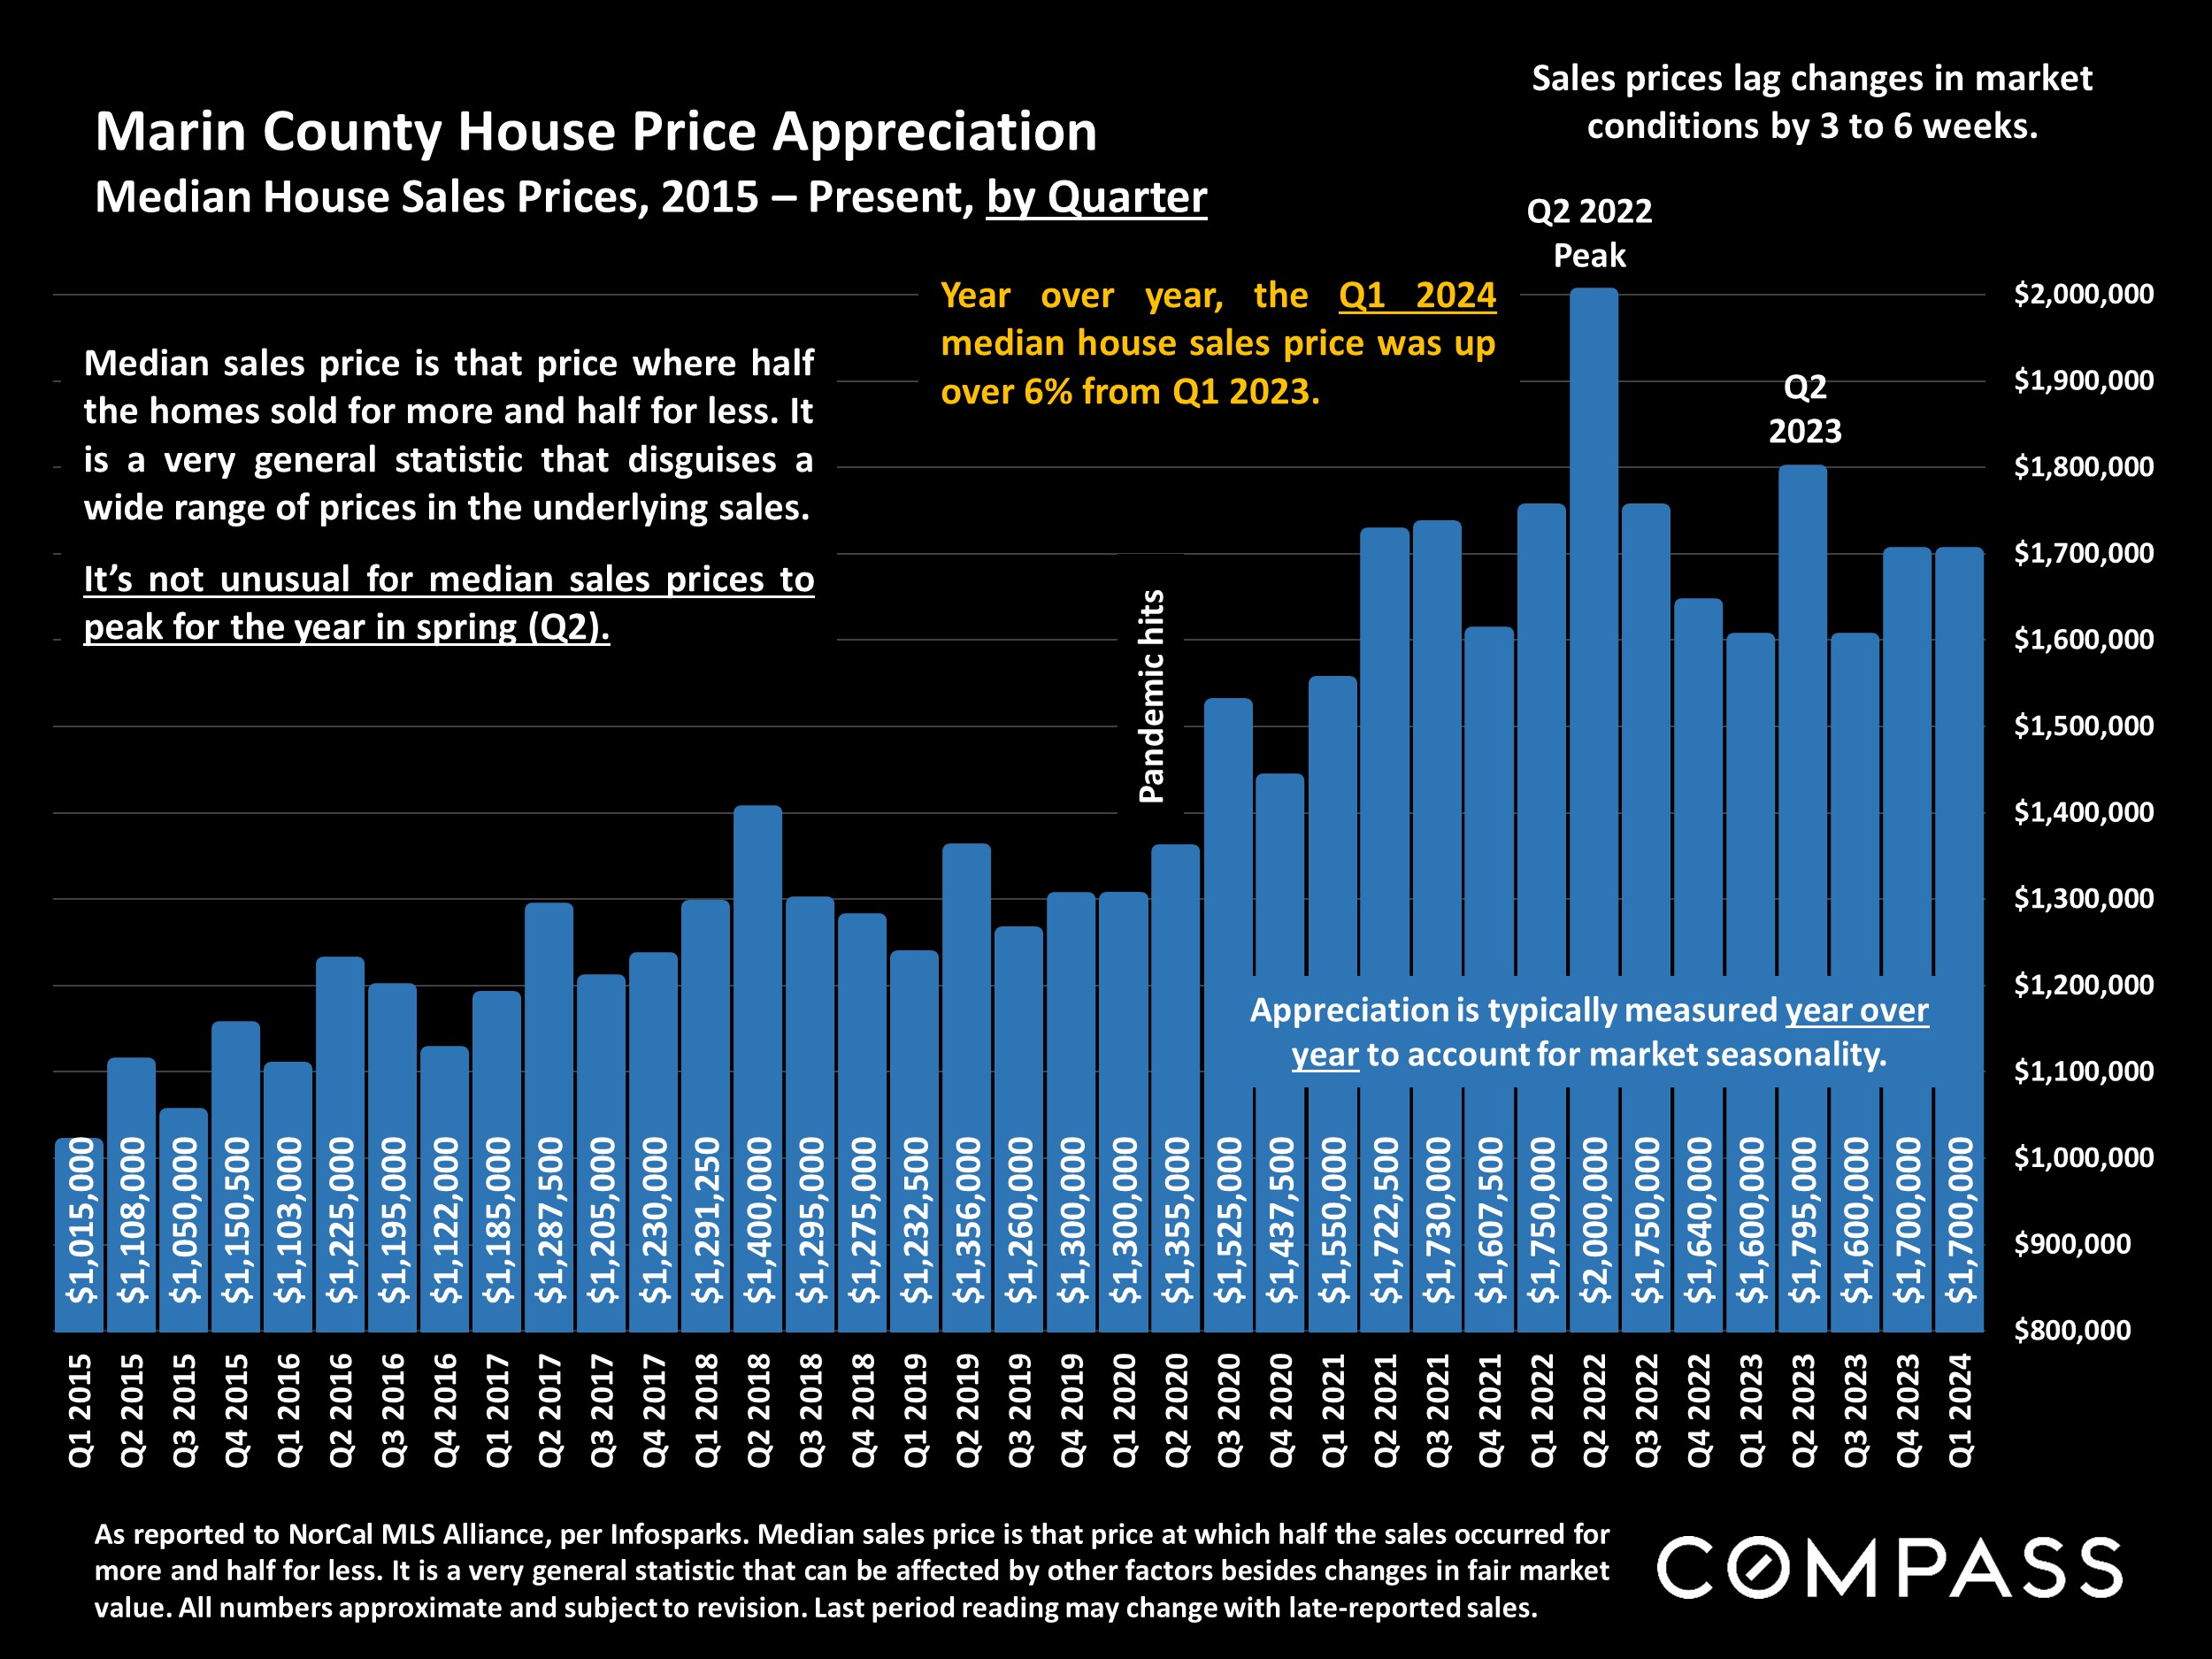 Marin County House Price Appreciation.Median House Sales Prices, 2015 - Present, by Quarter